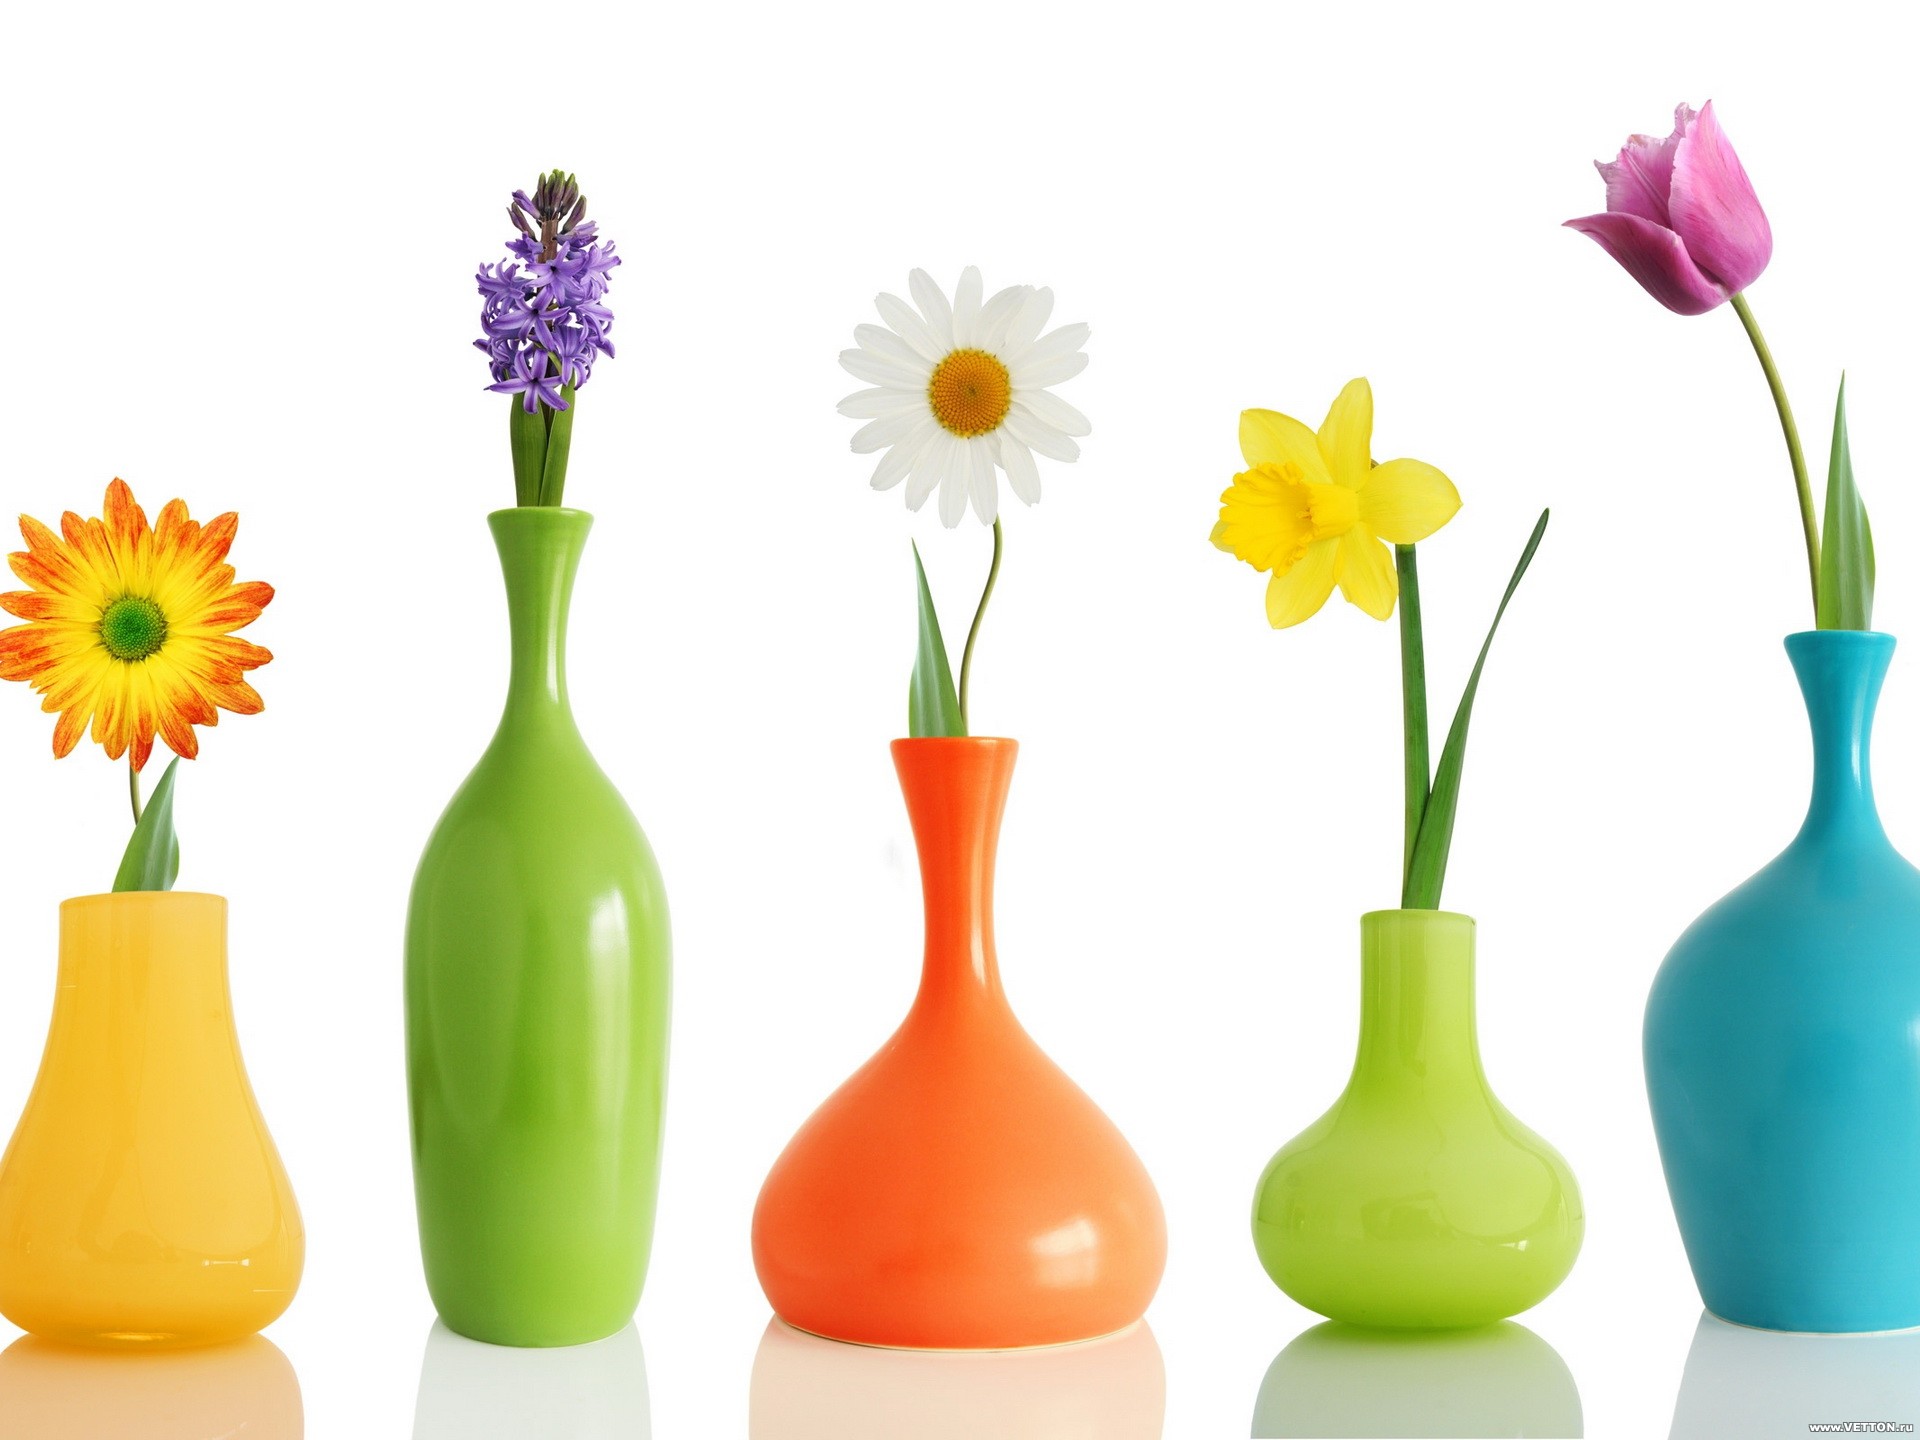  free 3d wallpapers 2010beautiful 3d hd colorful jars with flowers